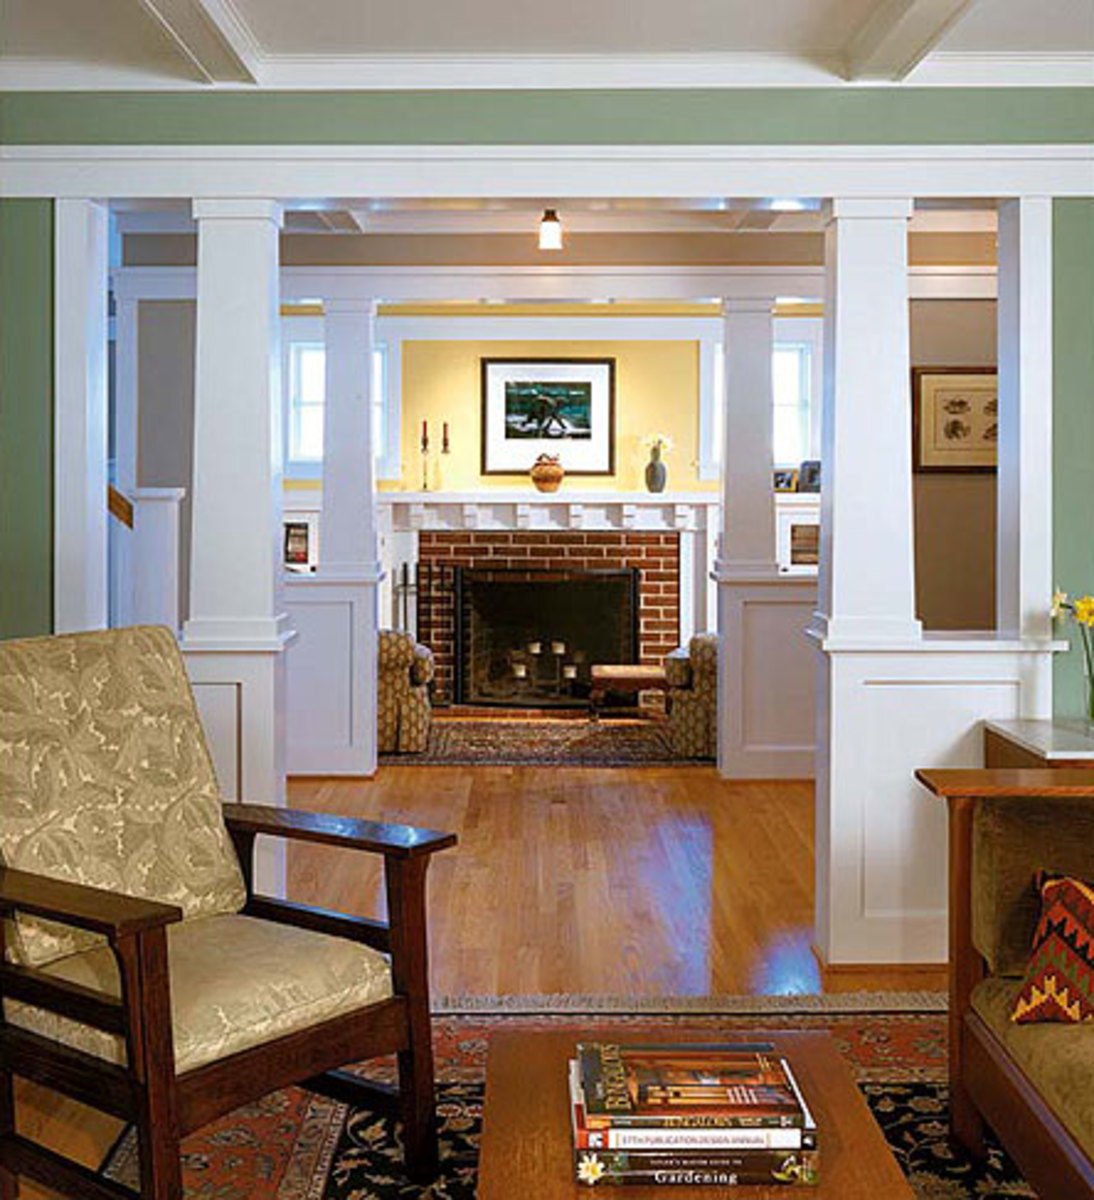 Interior Decorating Styles on Woodwork   Finishes For The Craftsman Home     Arts   Crafts Homes And